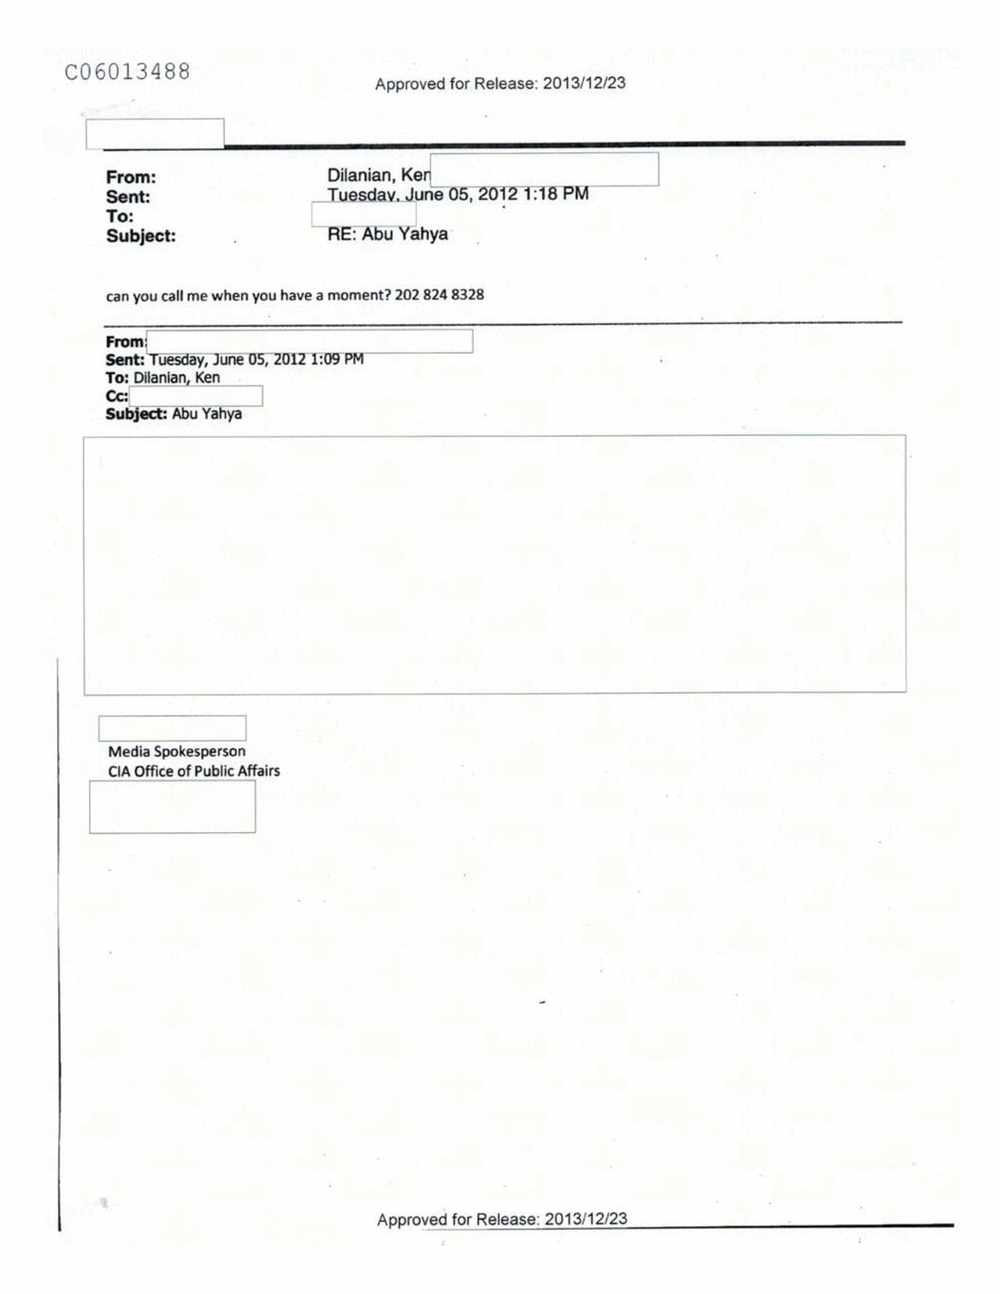 Page 338 from Email Correspondence Between Reporters and CIA Flacks